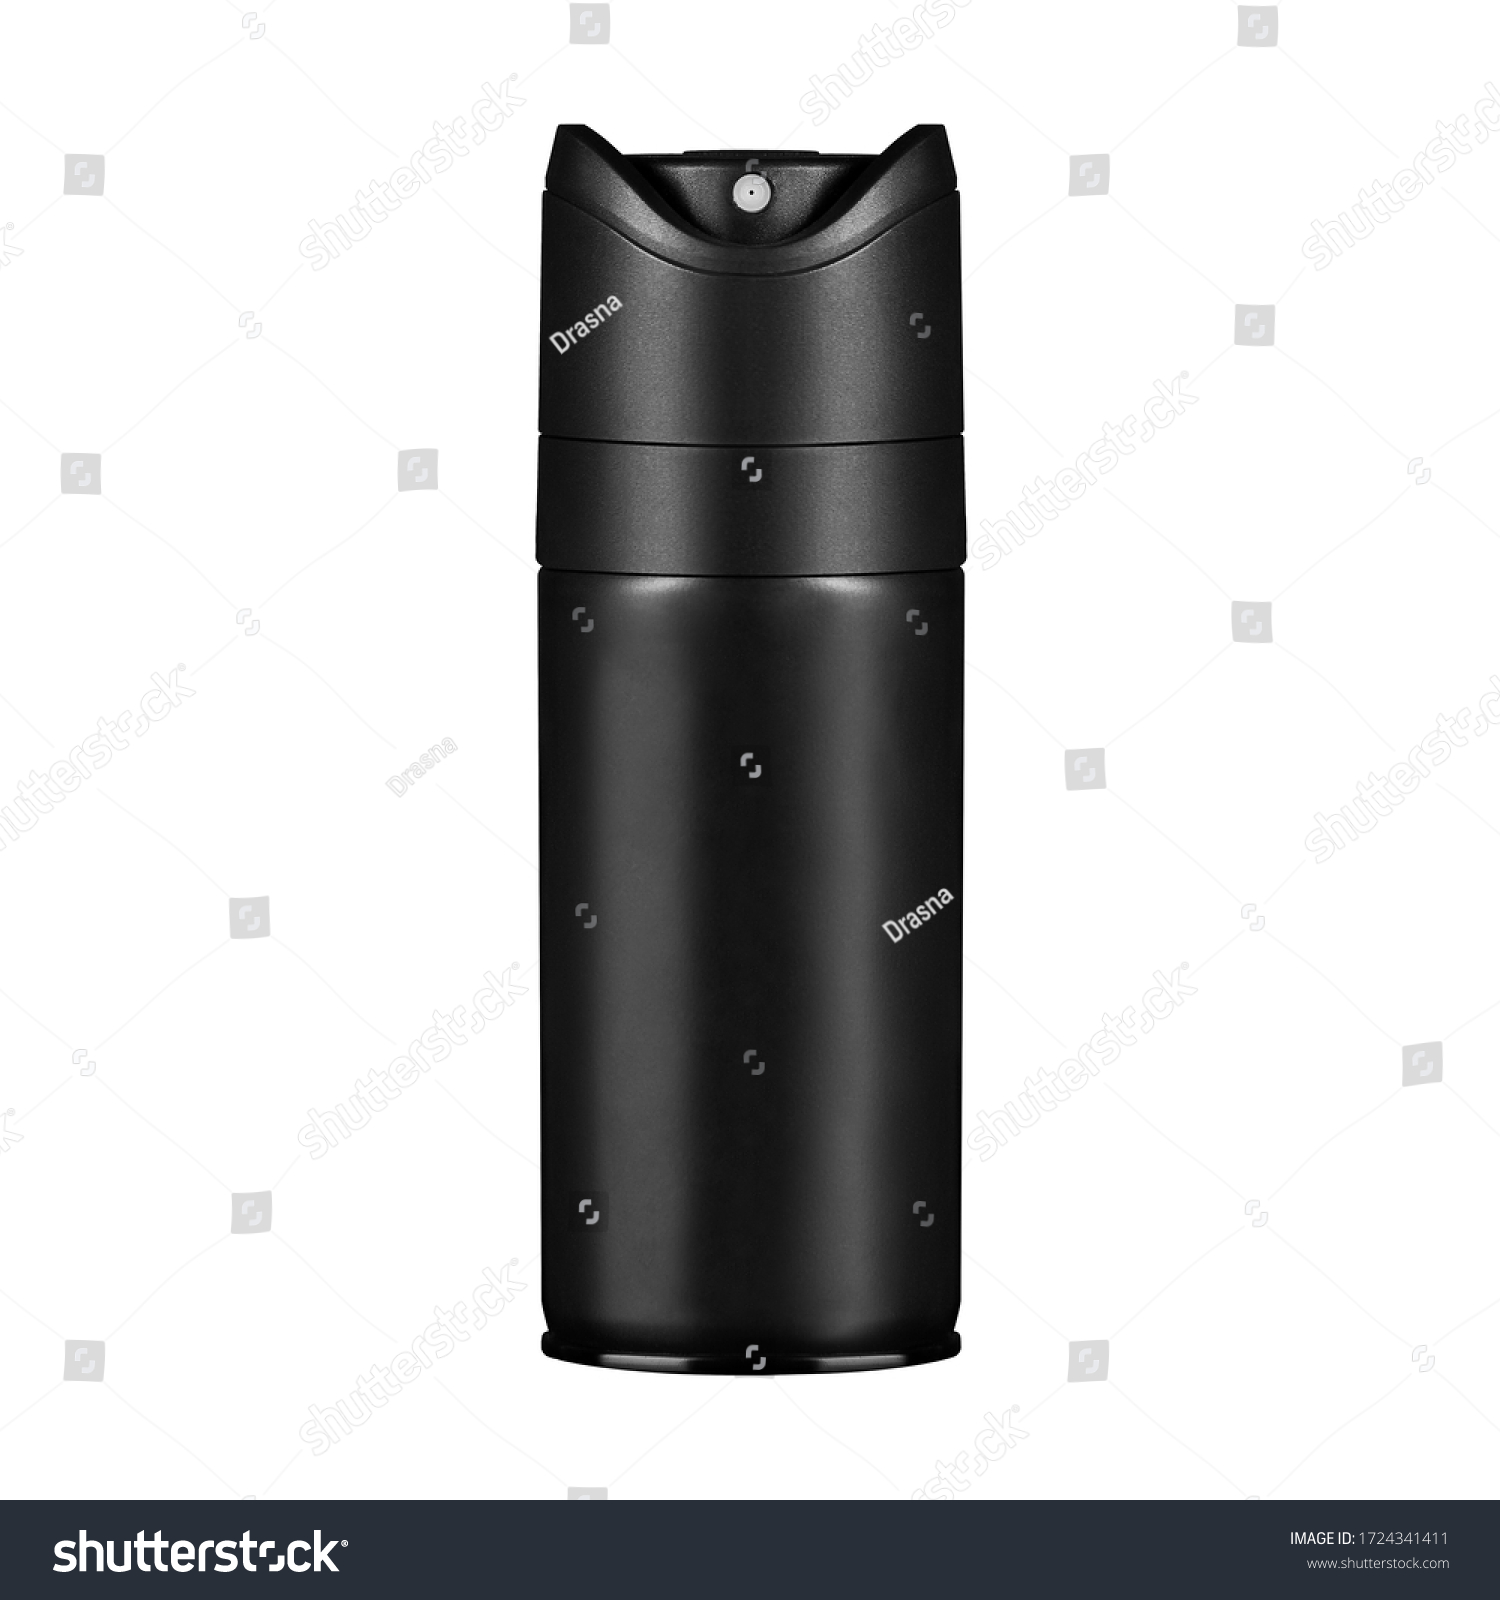 deodorant, cylindryc can black mockup isolated on white background, spray, bottle #1724341411